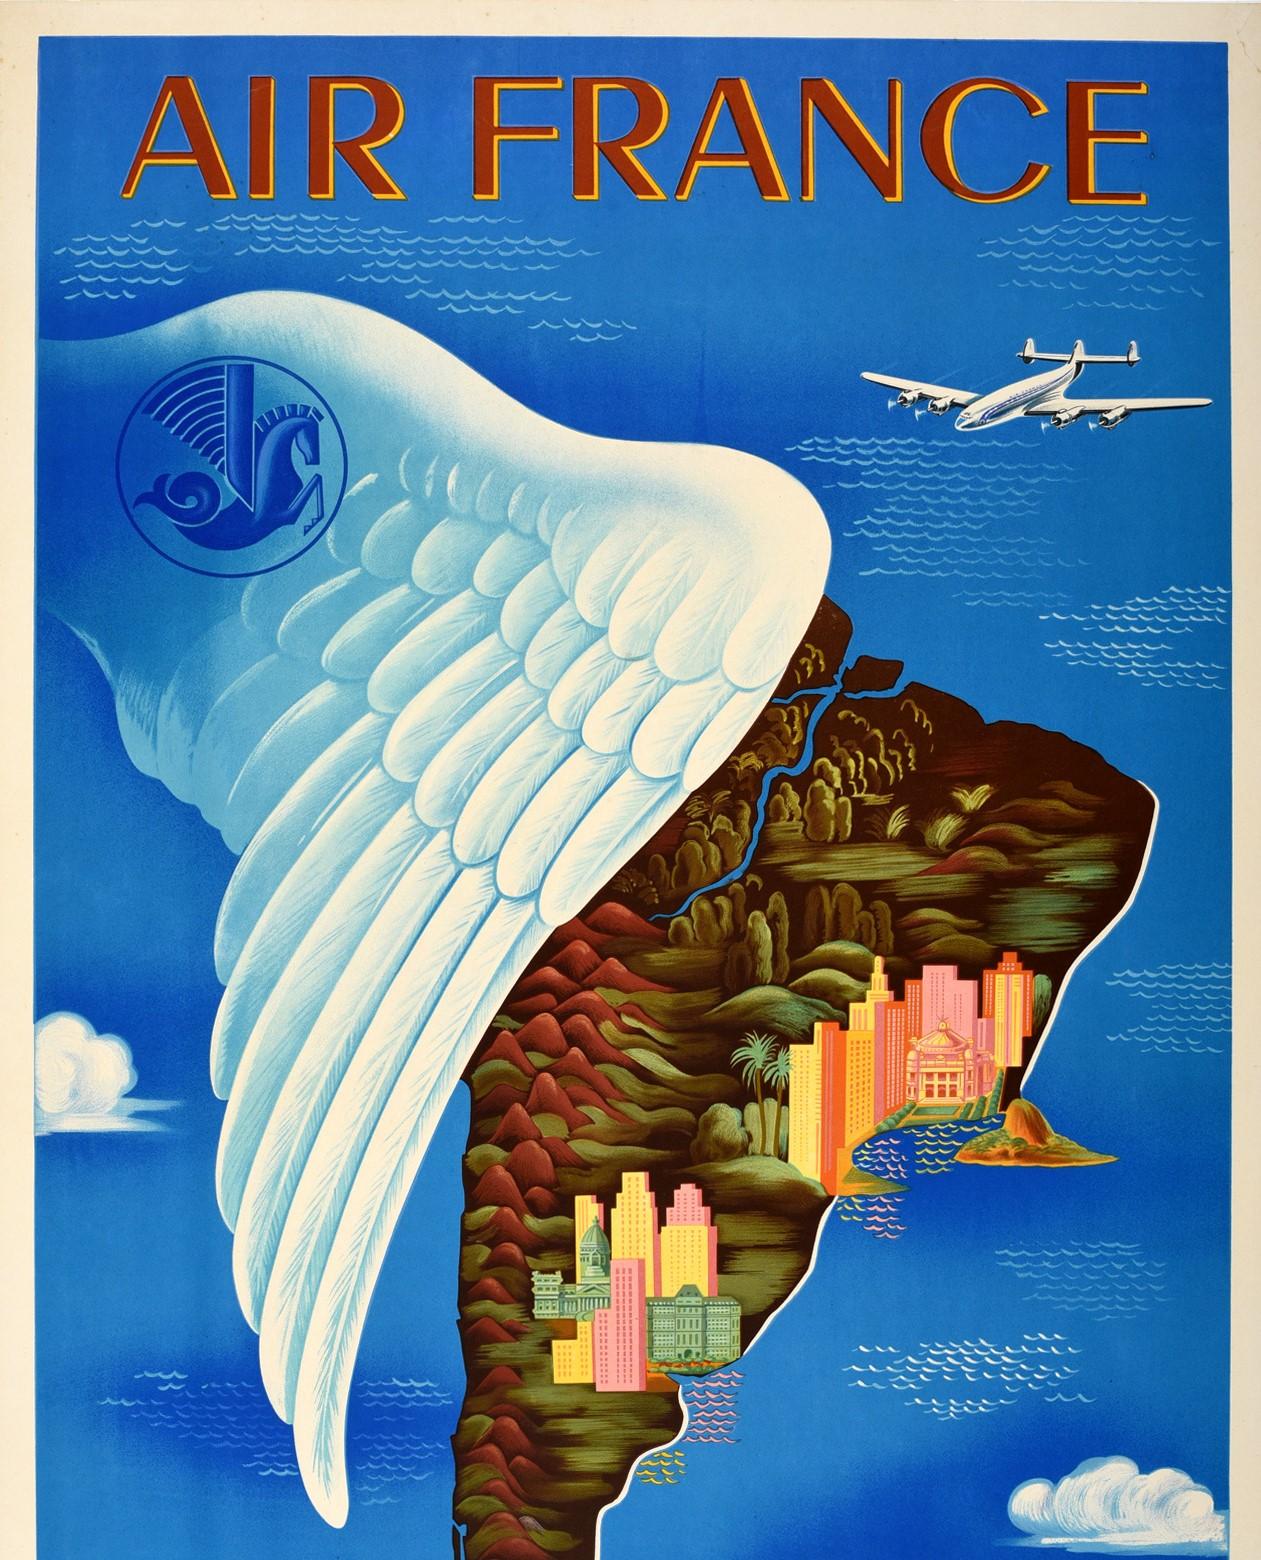 Original Vintage Travel Poster By Boucher For Air France South America Del Sur - Print by Lucien Boucher